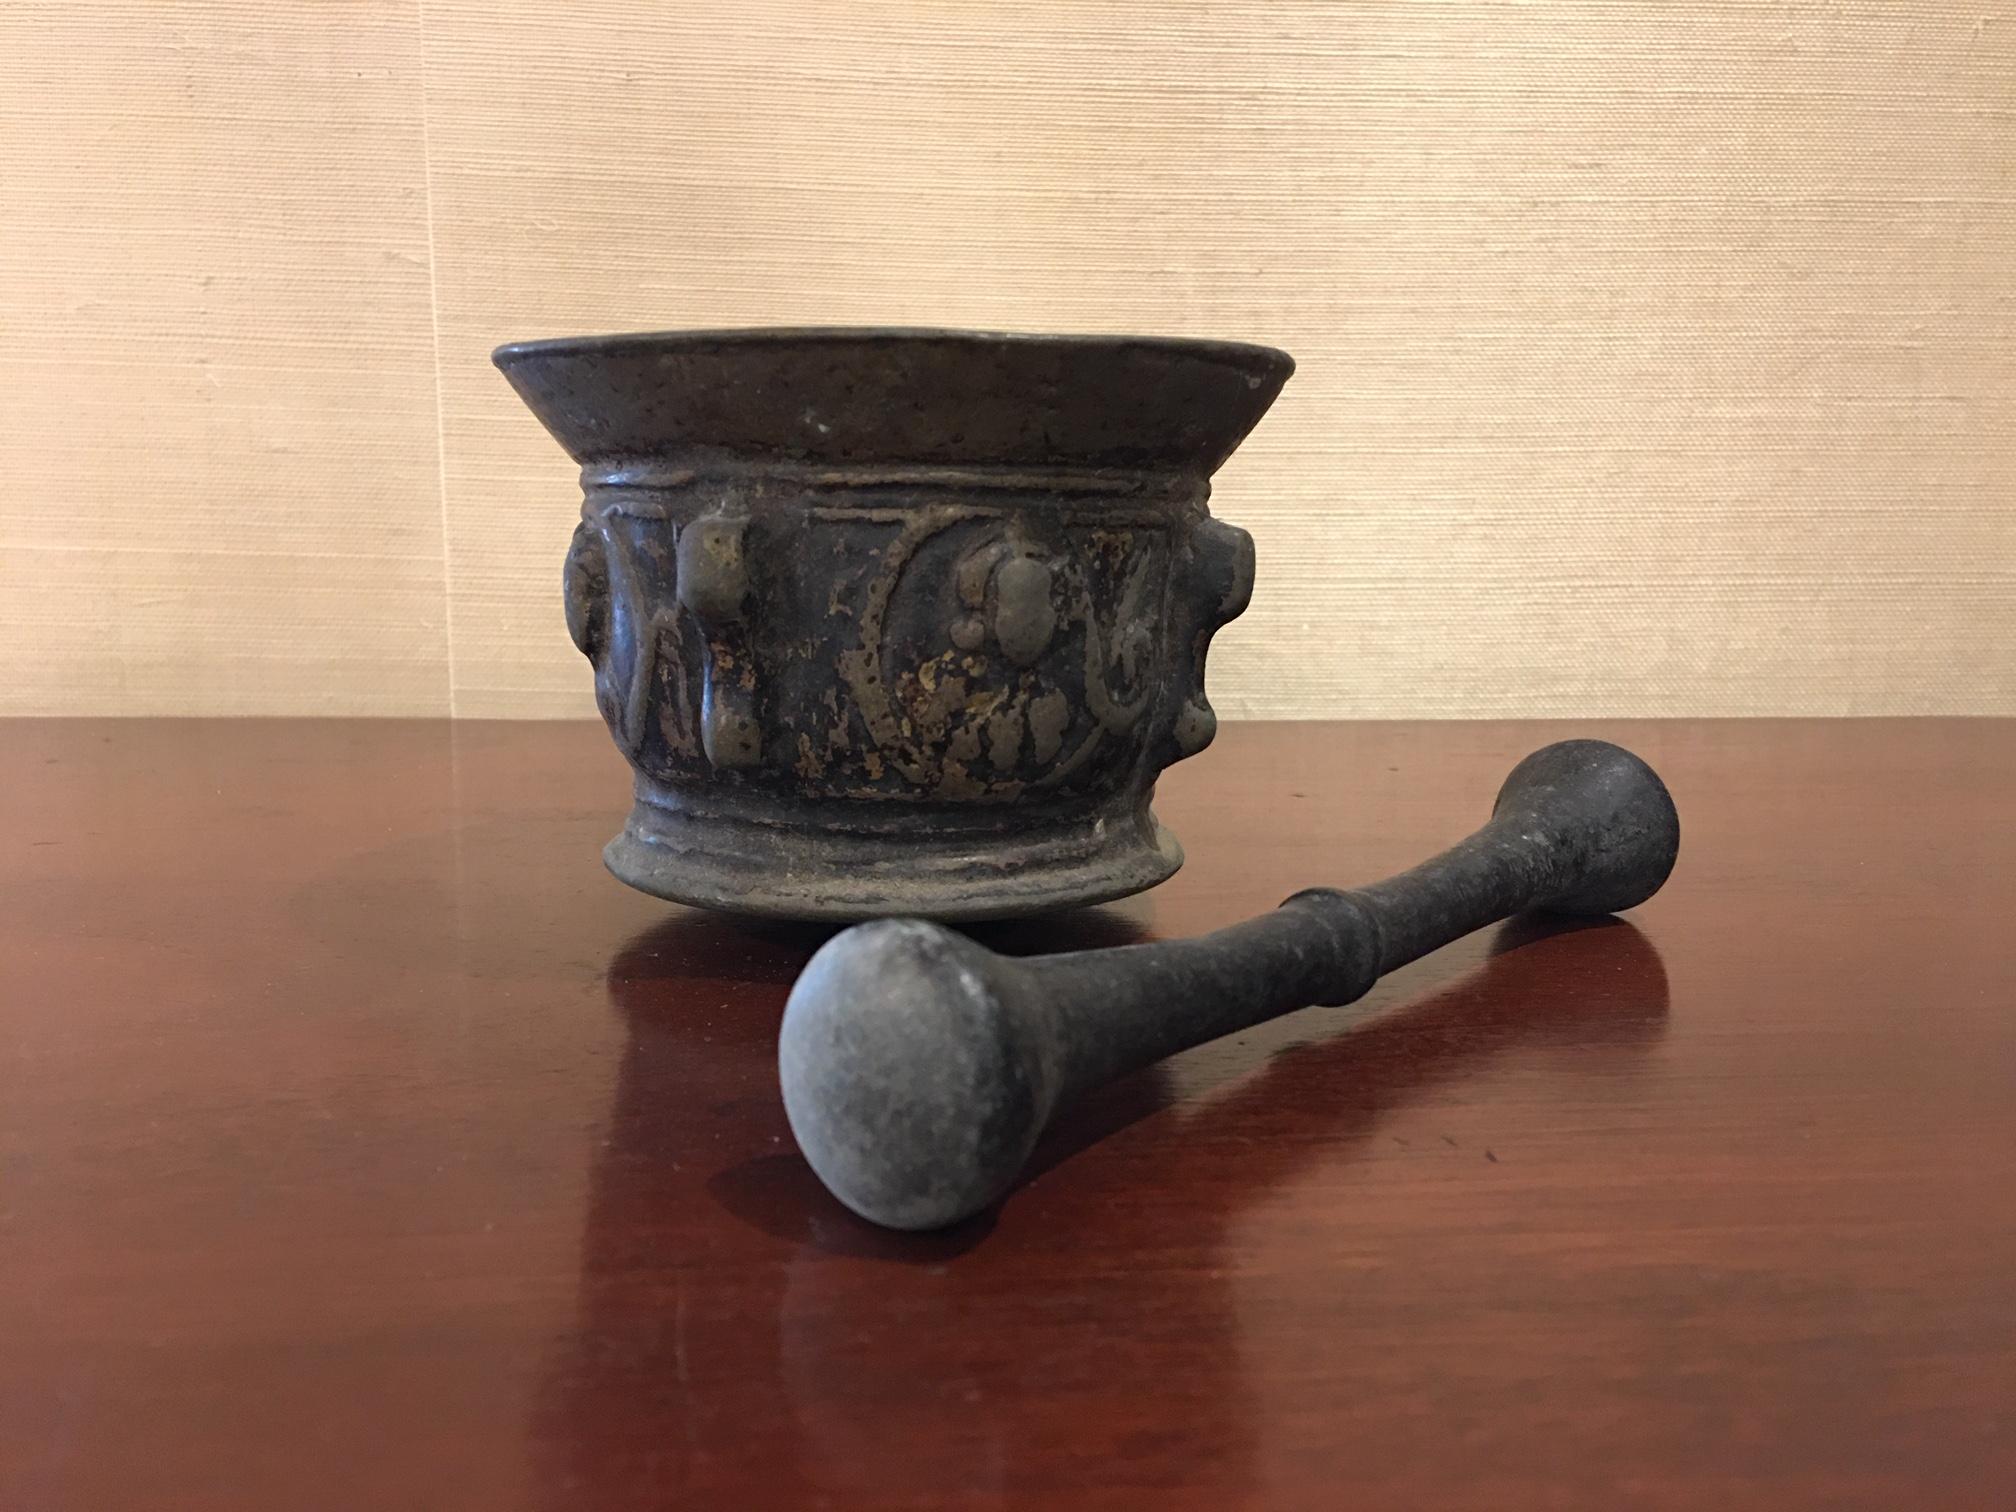 French bronze mortar and pestle, original patina, early 19th century. Pharmacy or herbalist antique bronze mortar. Handmade with pestle. Original patina.